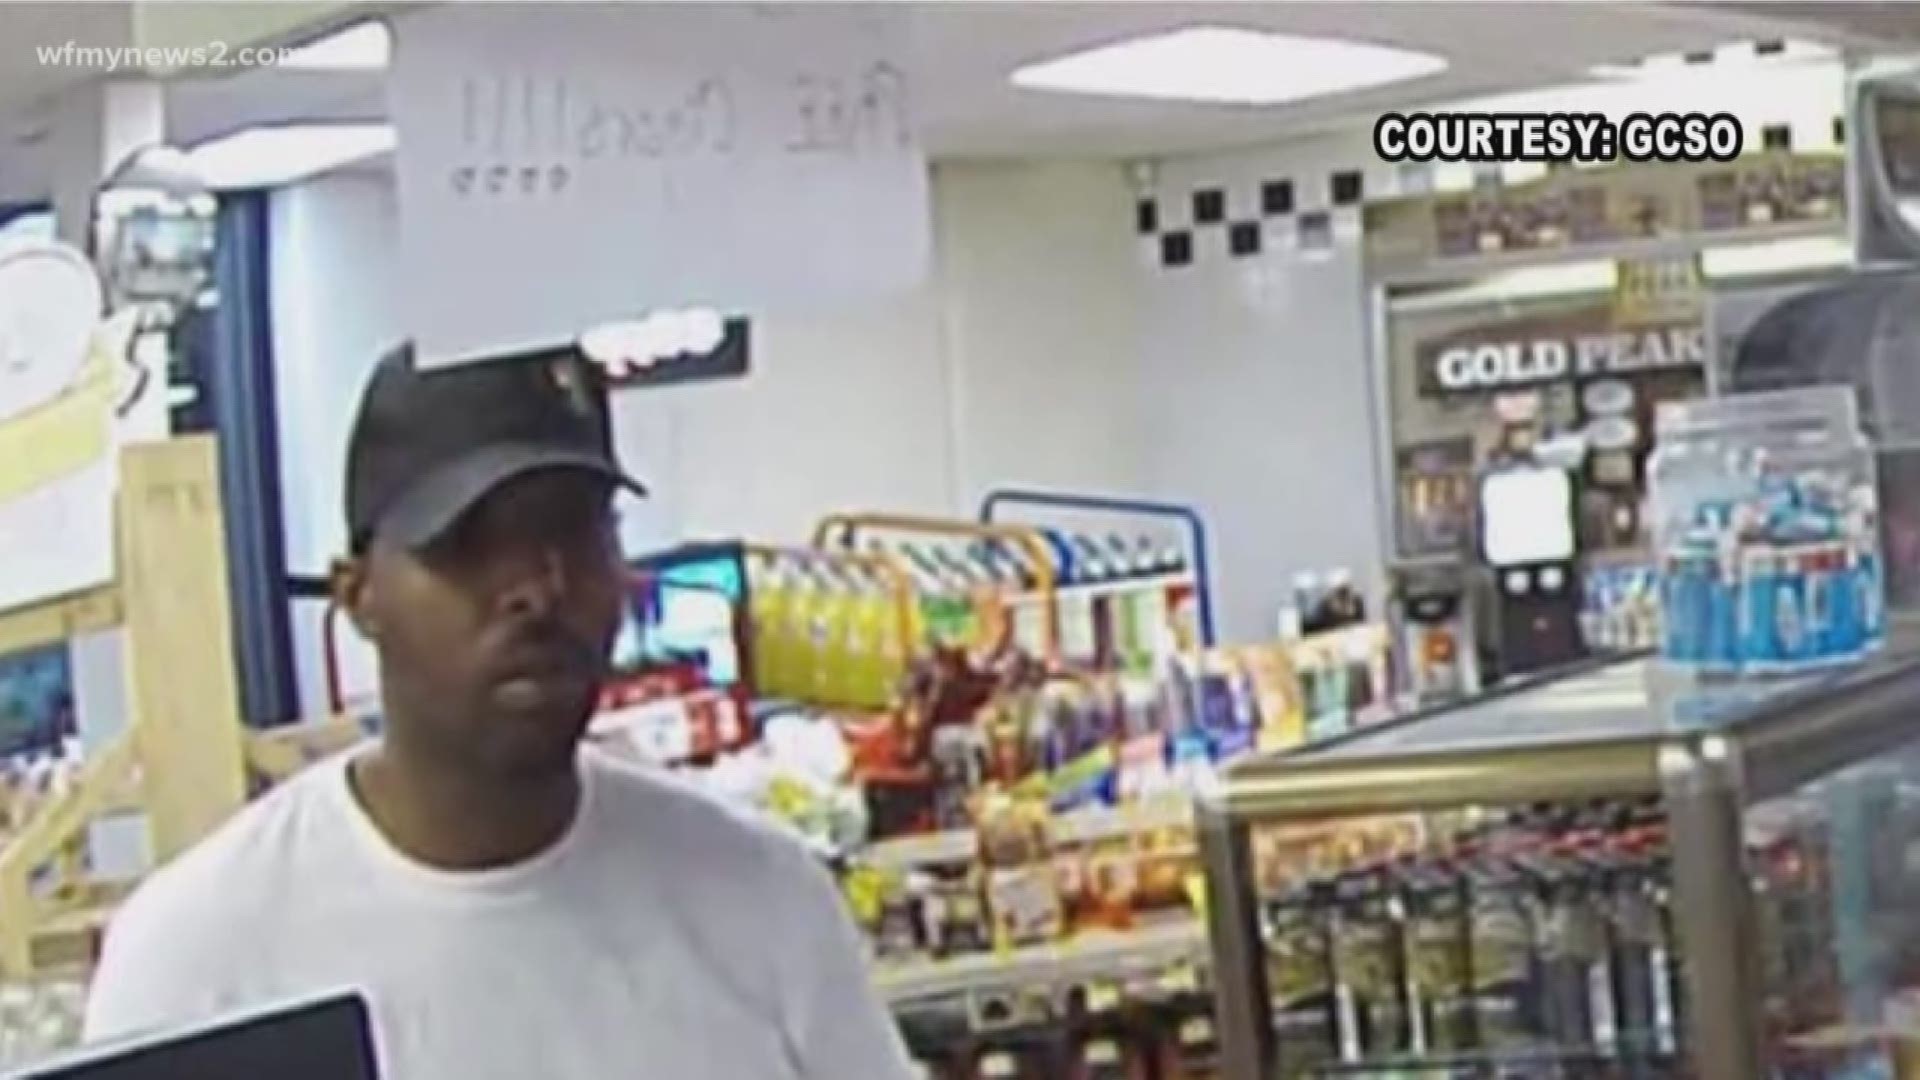 This suspect is accused of stealing thousands of dollars from three restaurants and two convenience stores within the past month, according to Corporate Seals with the Guilford County Sheriffs Office.